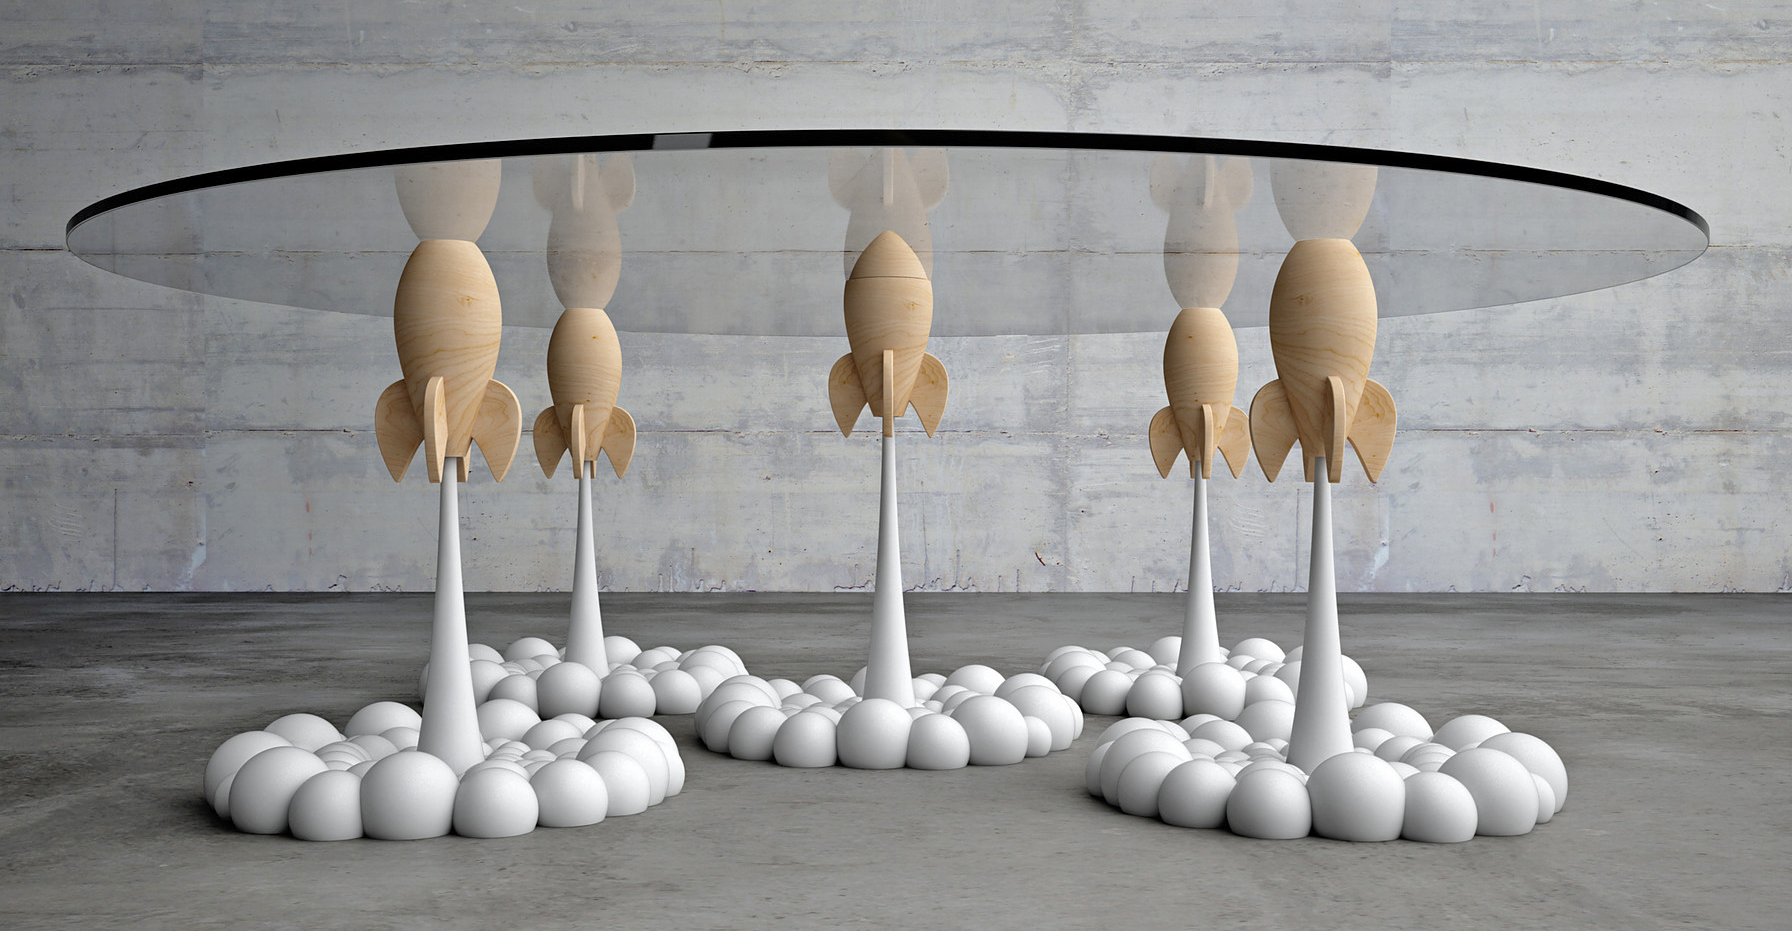 Whimsical Coffee Table Recreates The Start Of Our Planet’s Nuclear Apocalypse